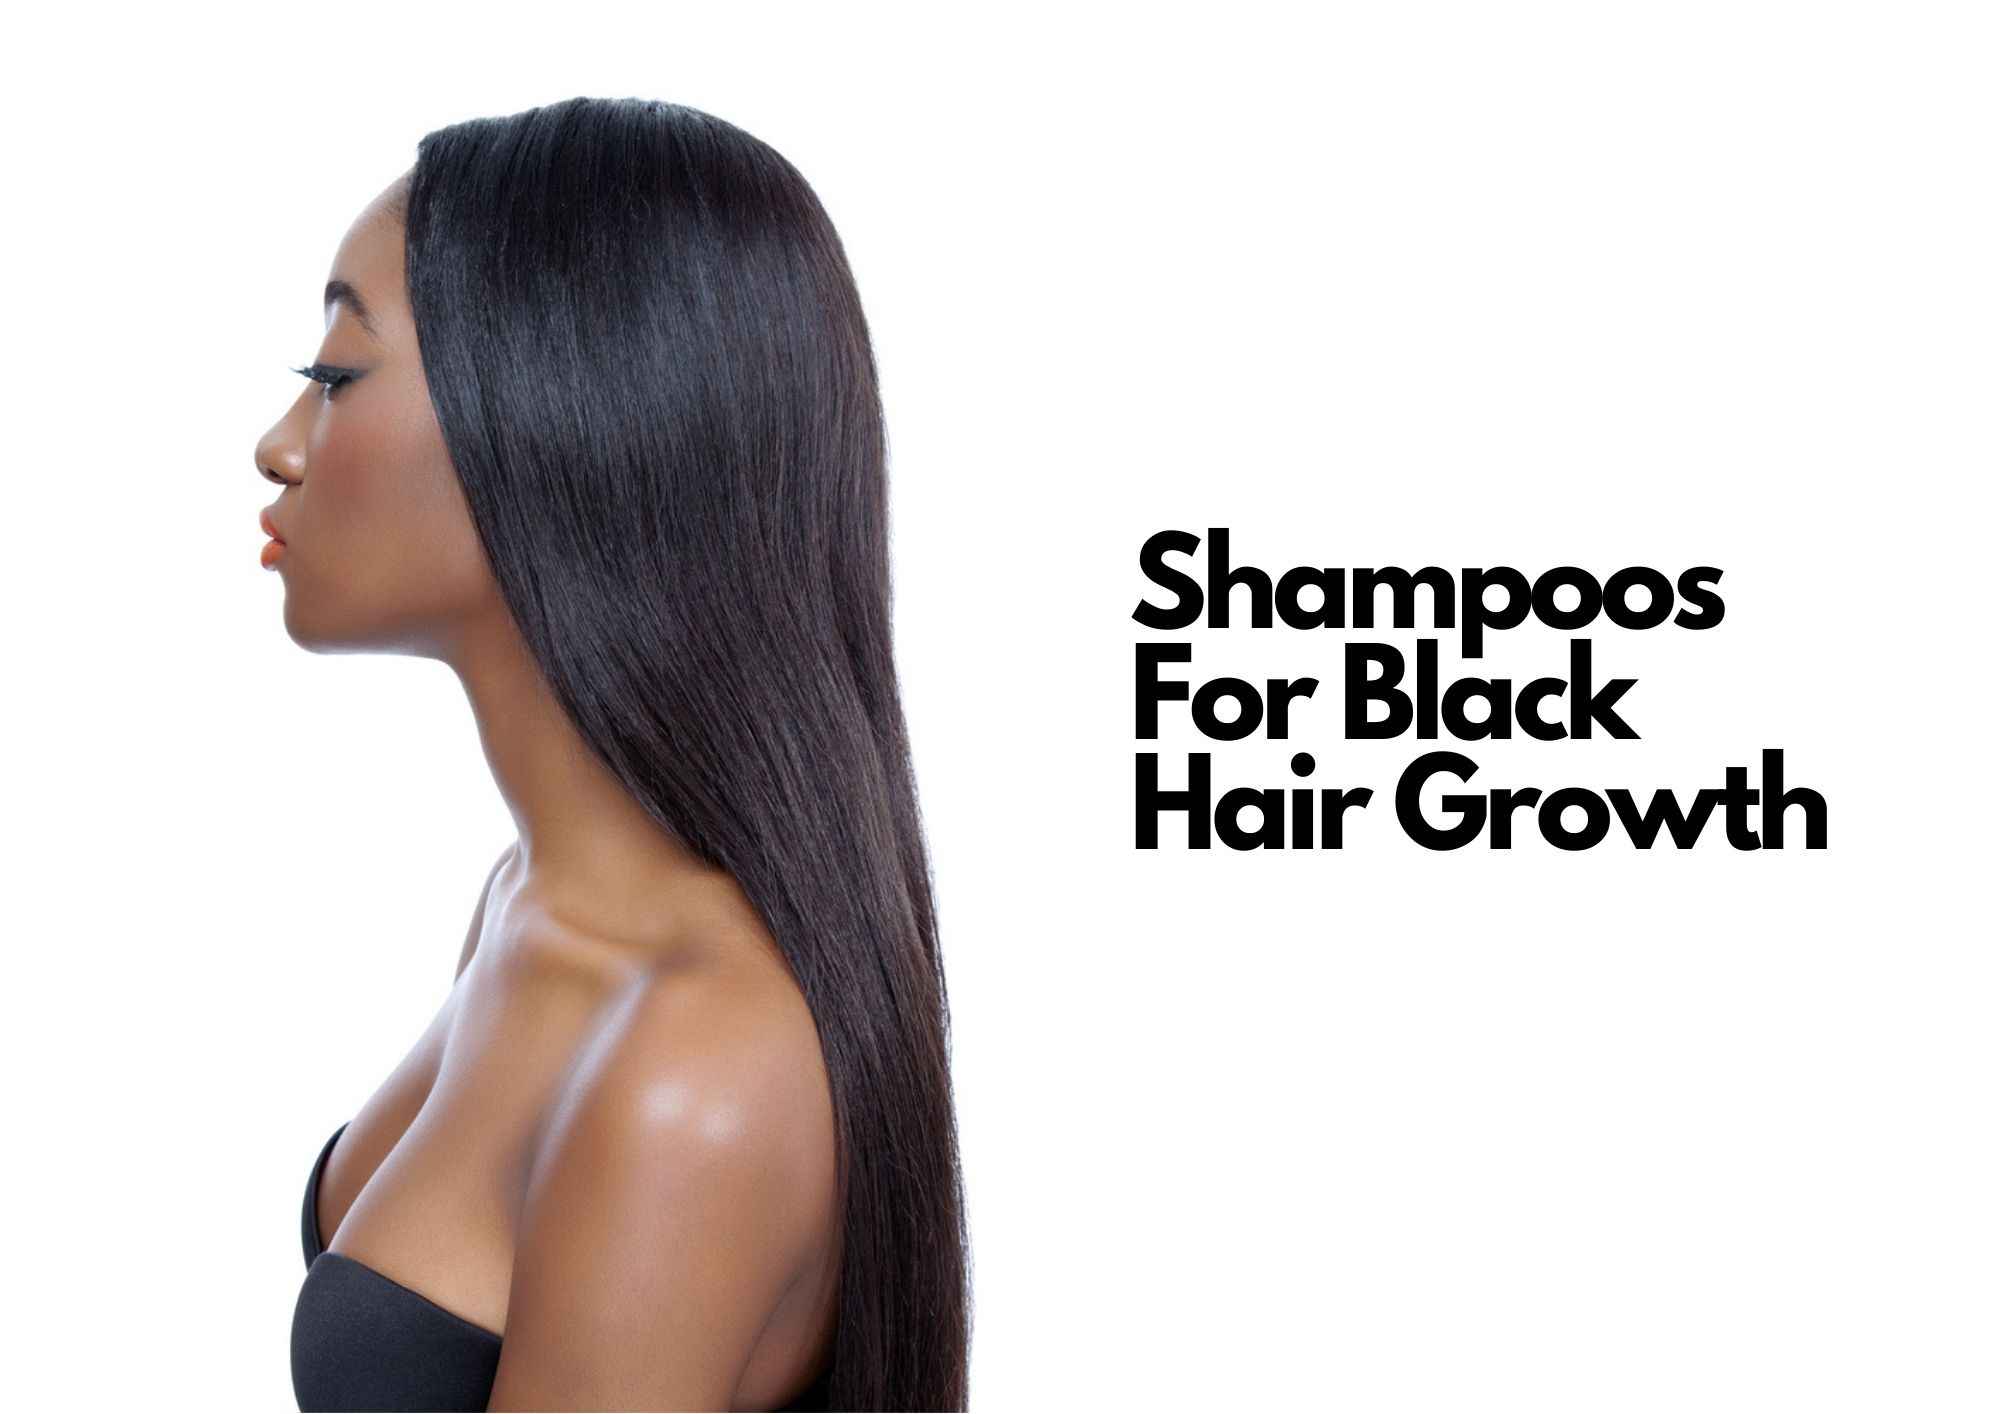 Natural Hair Products From Target You Probably Didn't Know Existed –  StyleCaster